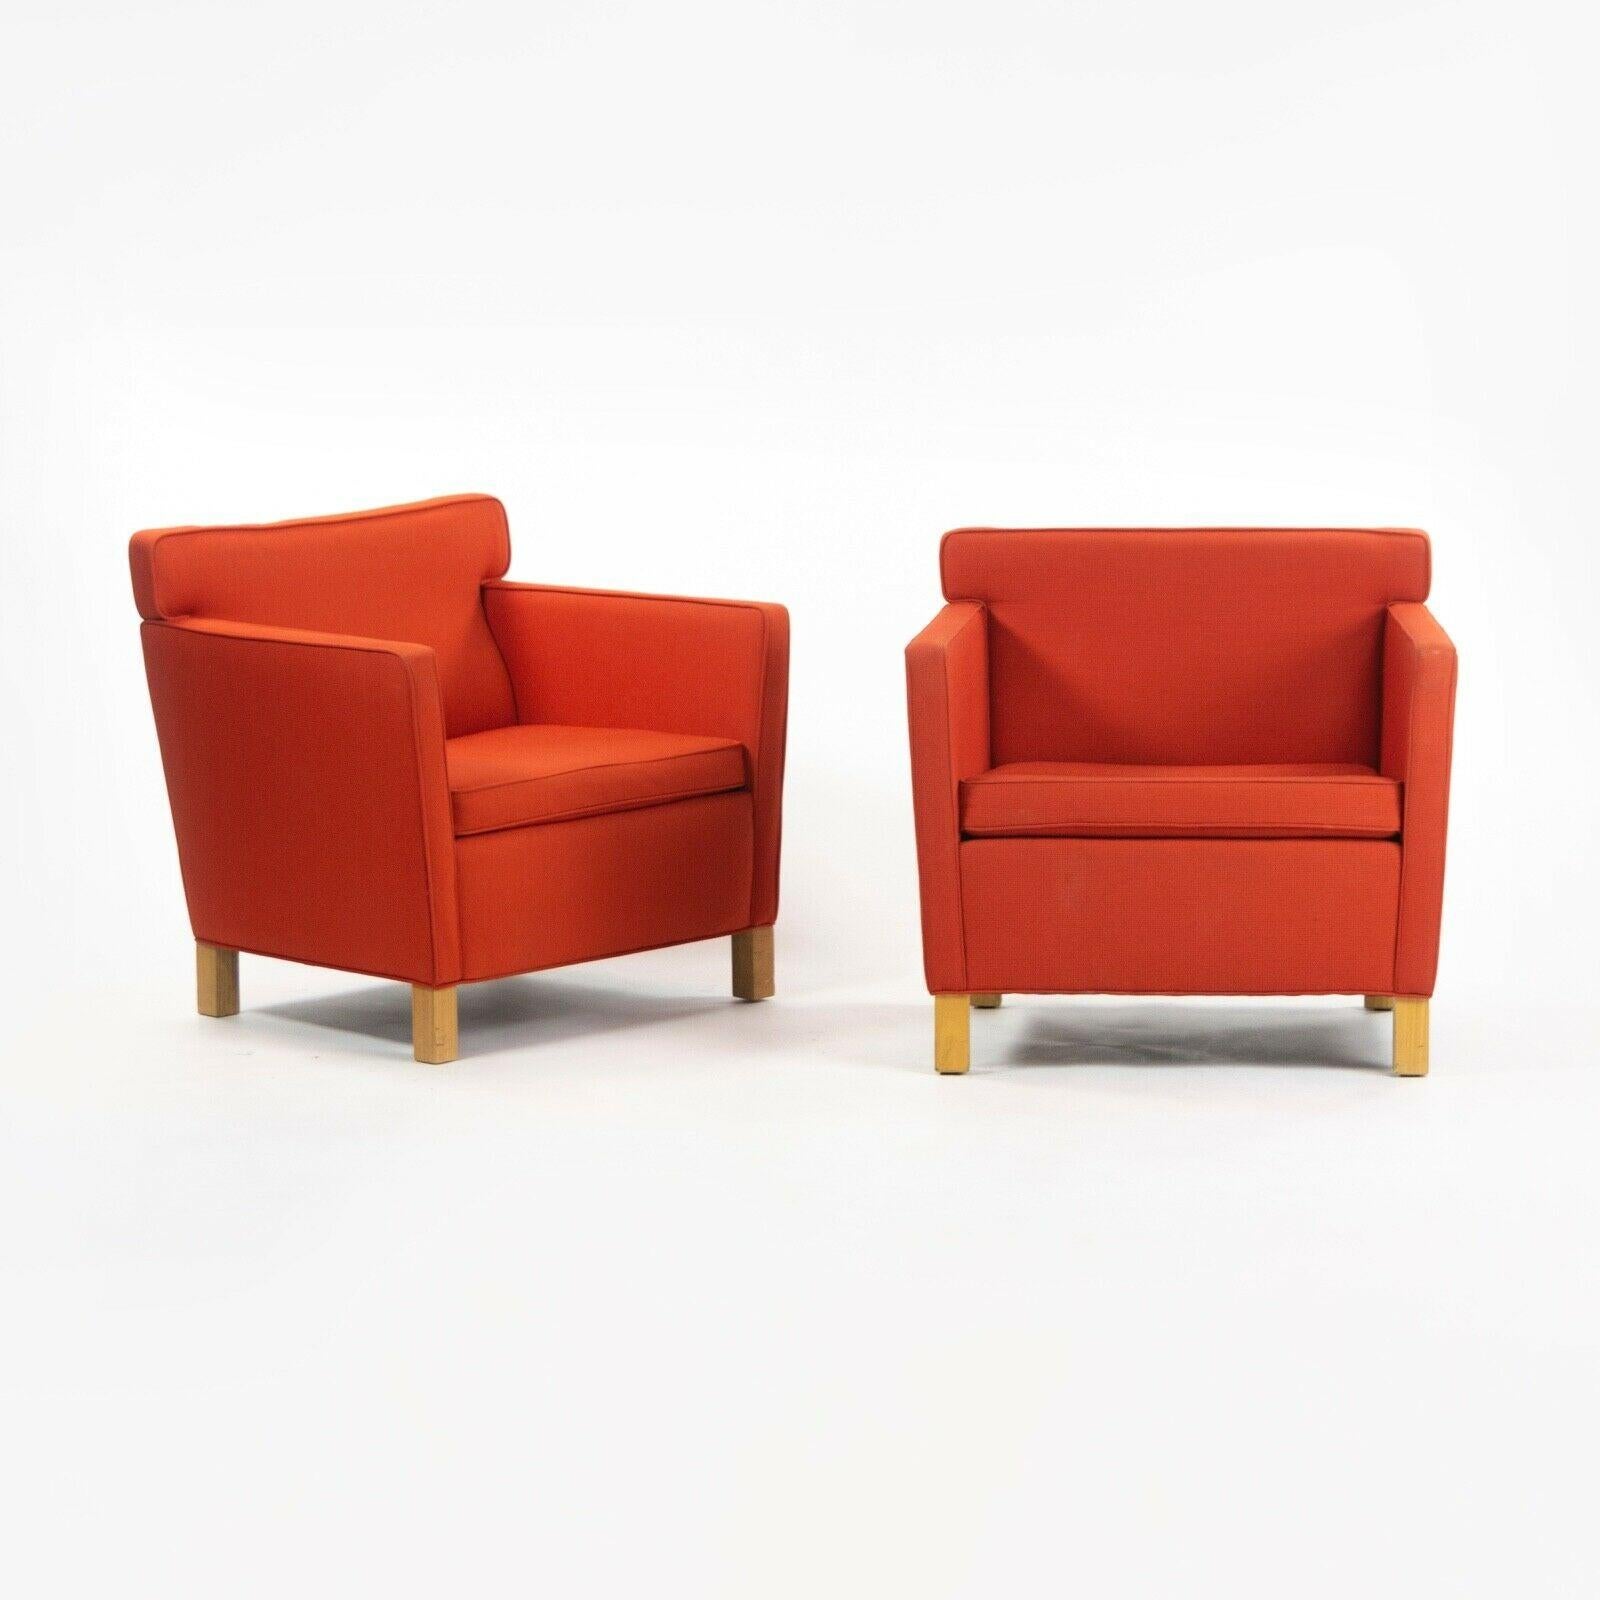 Listed for sale is a pair of gorgeous and original Mies Van Der Rohe Krefeld lounge chairs, produced by Knoll.

These examples came directly from McKinsey's New York Headquarters. The lounge chairs are properly marked and guaranteed as